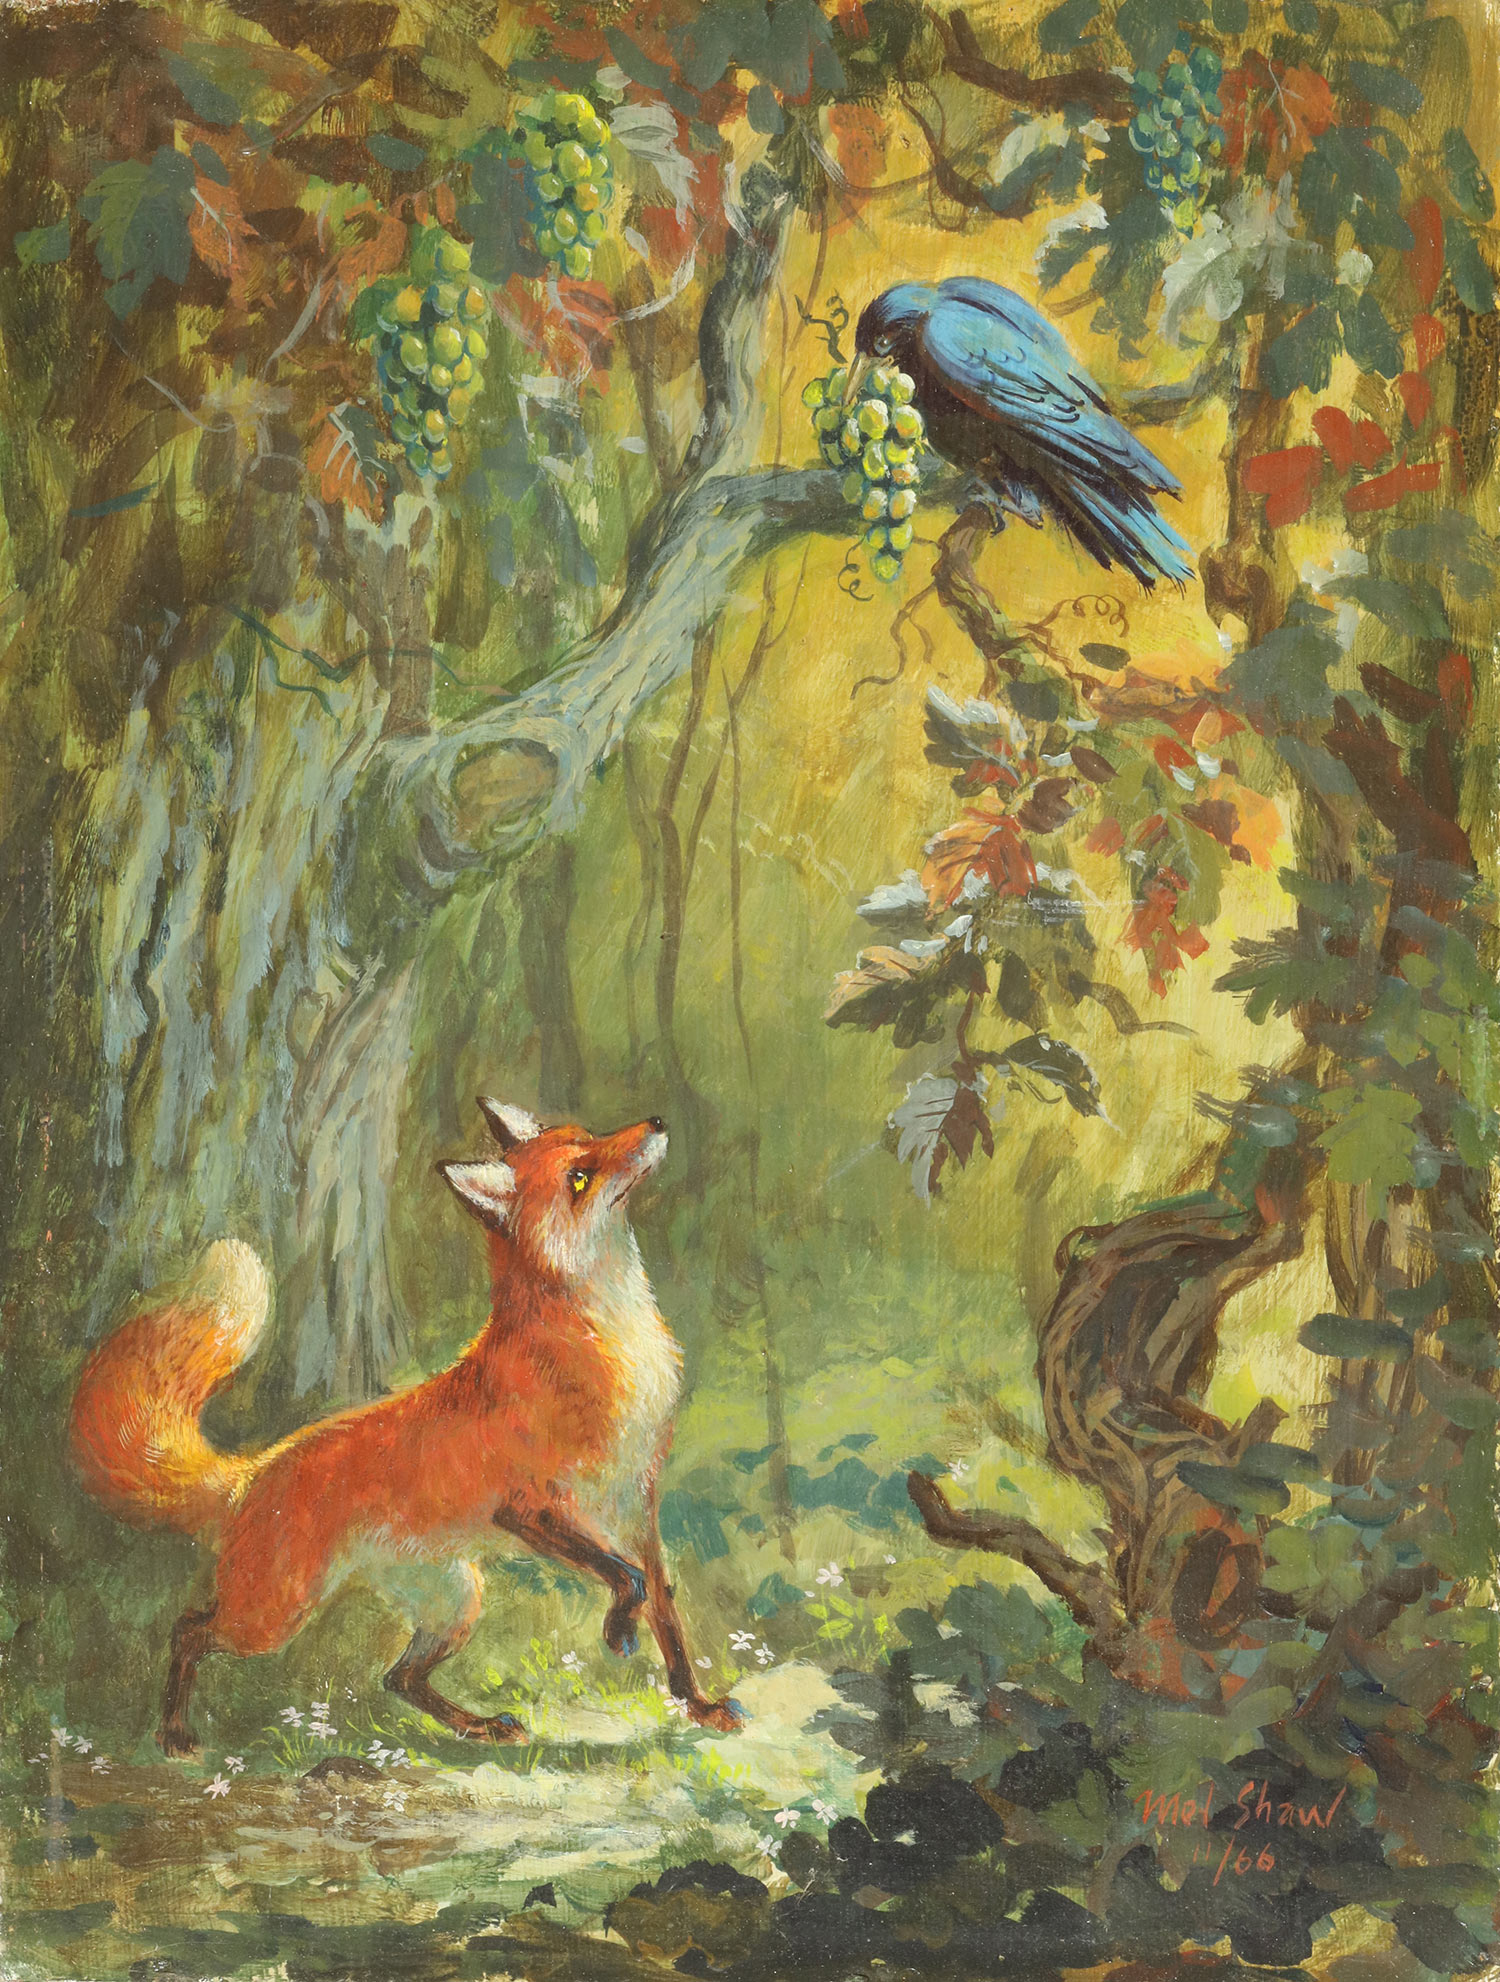 Mel Shaw painting, "The Fox and the Grapes, Aesop Fable," 1966. (Image: Courtesy Rick and Janet Shaw and Melissa Couch, © Mel Shaw Studios.)